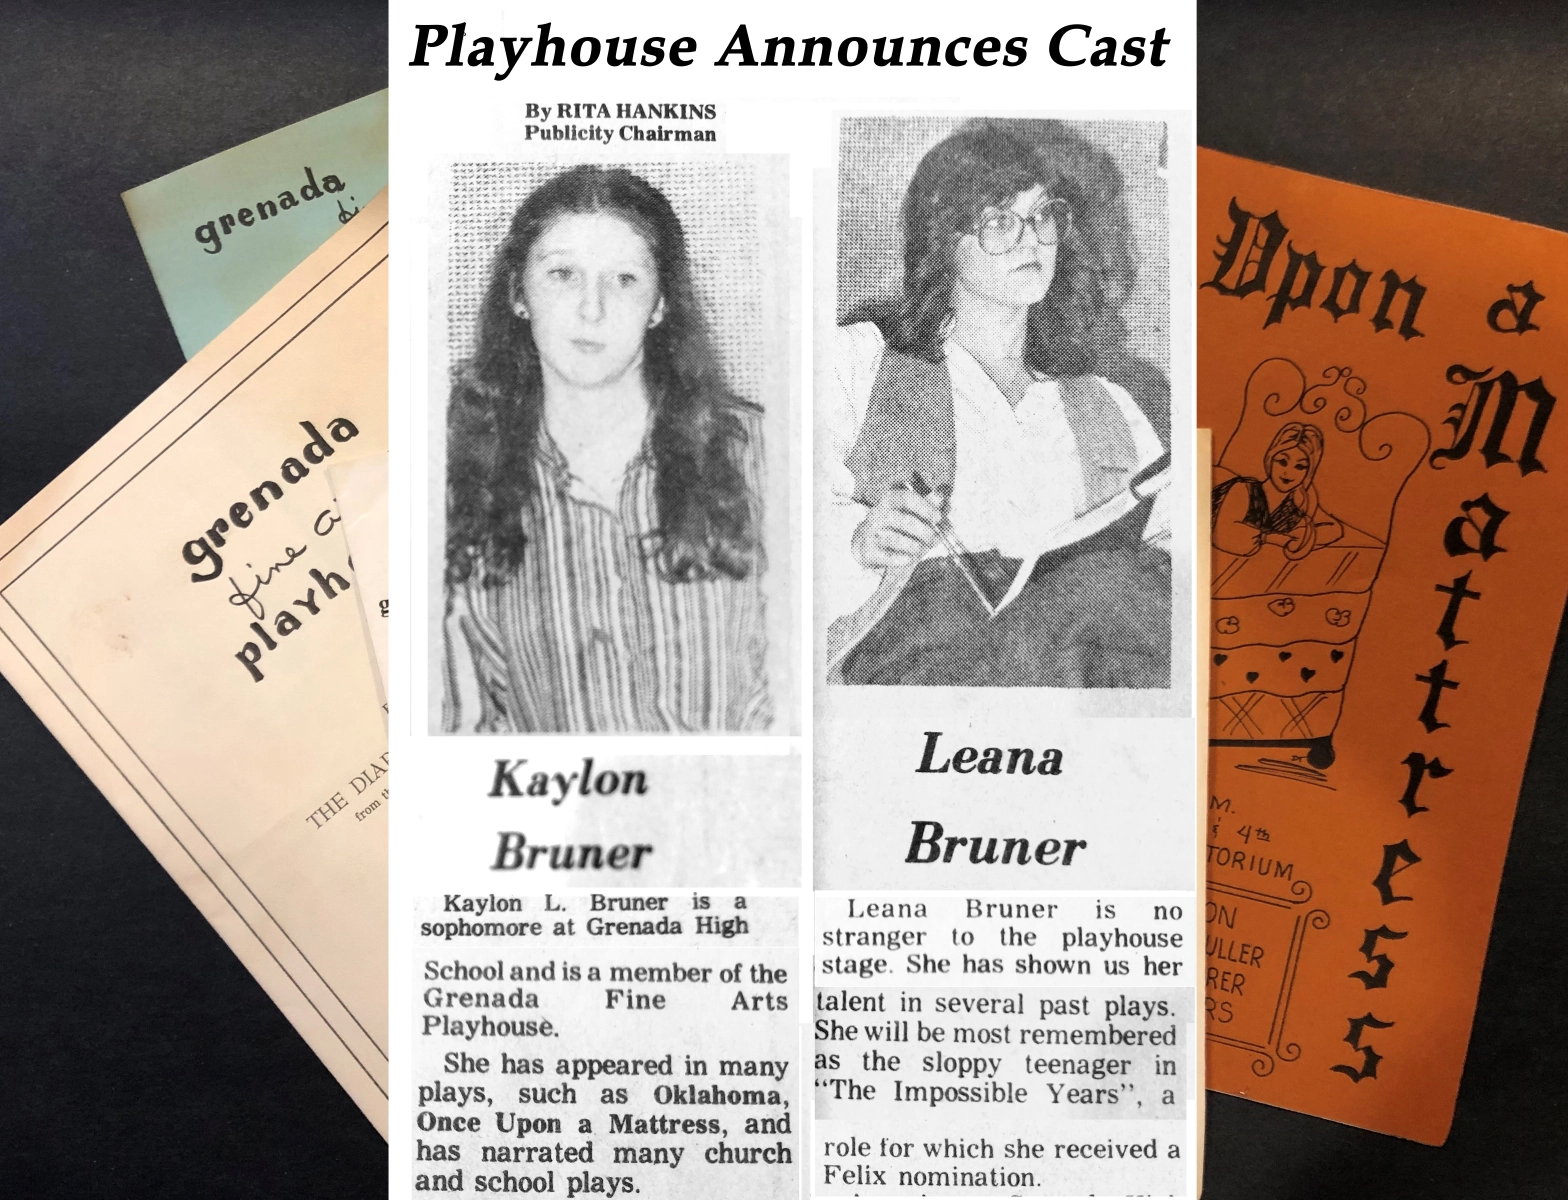 The newspaper clipping above is from an article published in the Daily Sentinel Star, the Grenada, Mississippi, newspaper, on February 4, 1980, after my sister Leana and I were cast in the Grenada Fine Arts Playhouse production of Bells are Ringing.